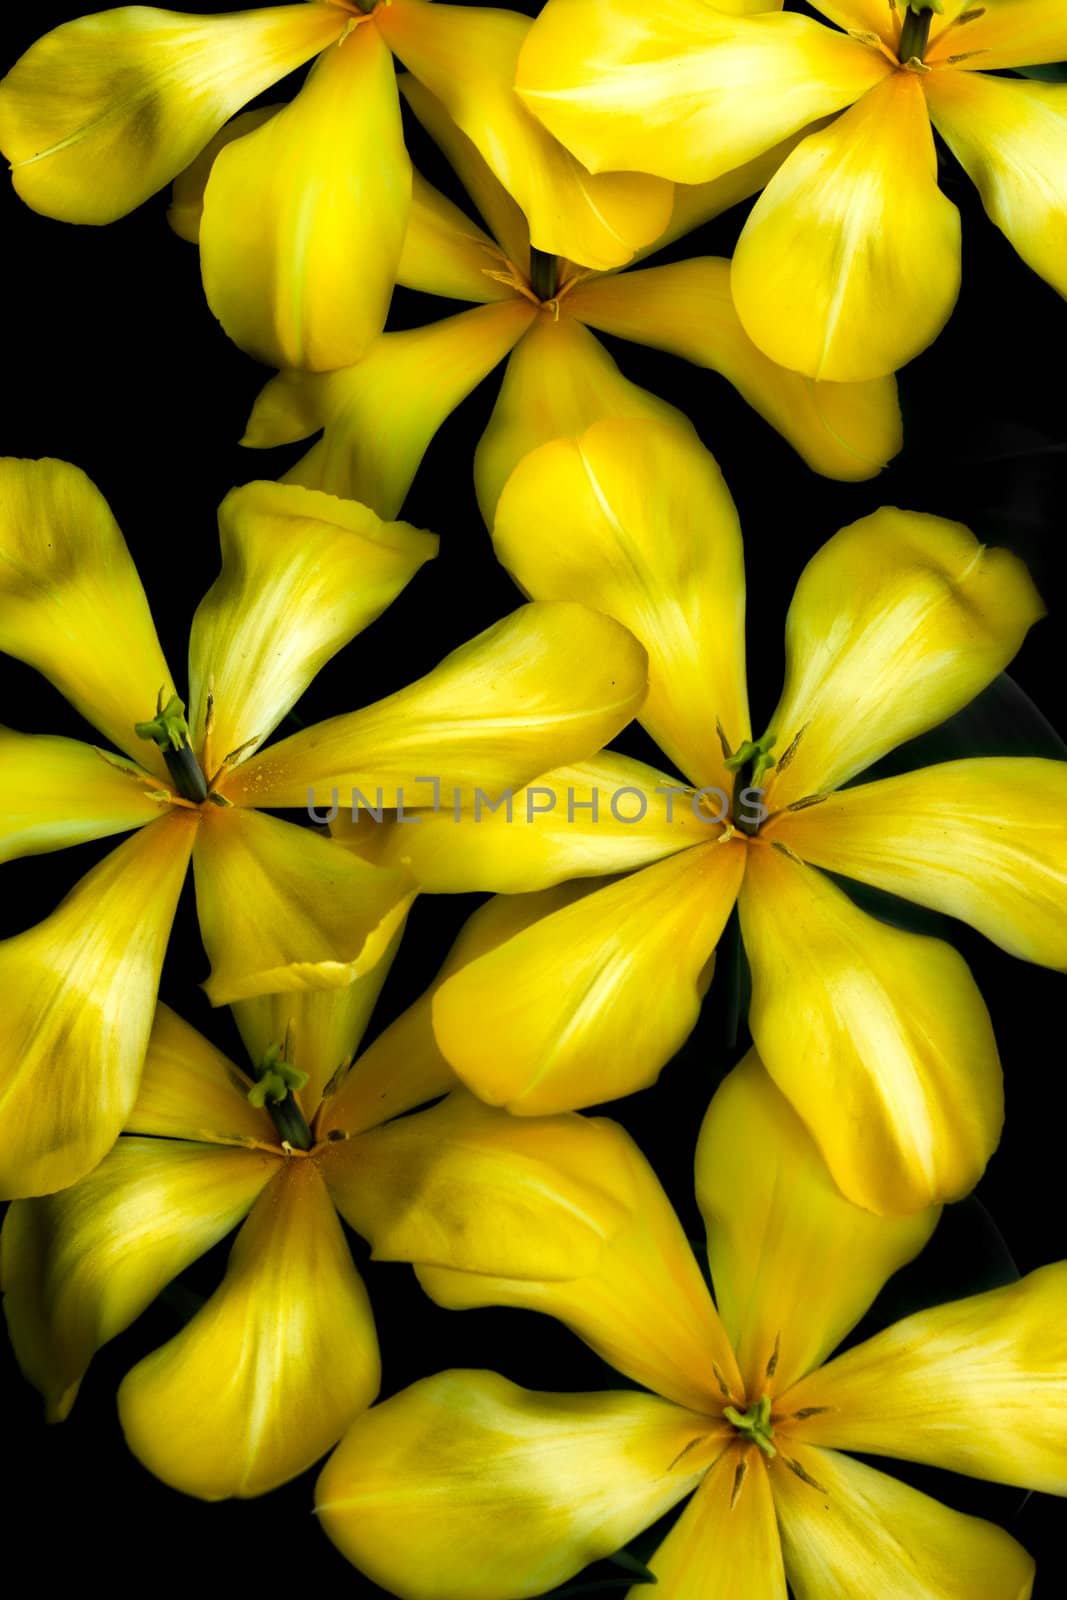 Unique Yellow Pond Lilies by wolterk